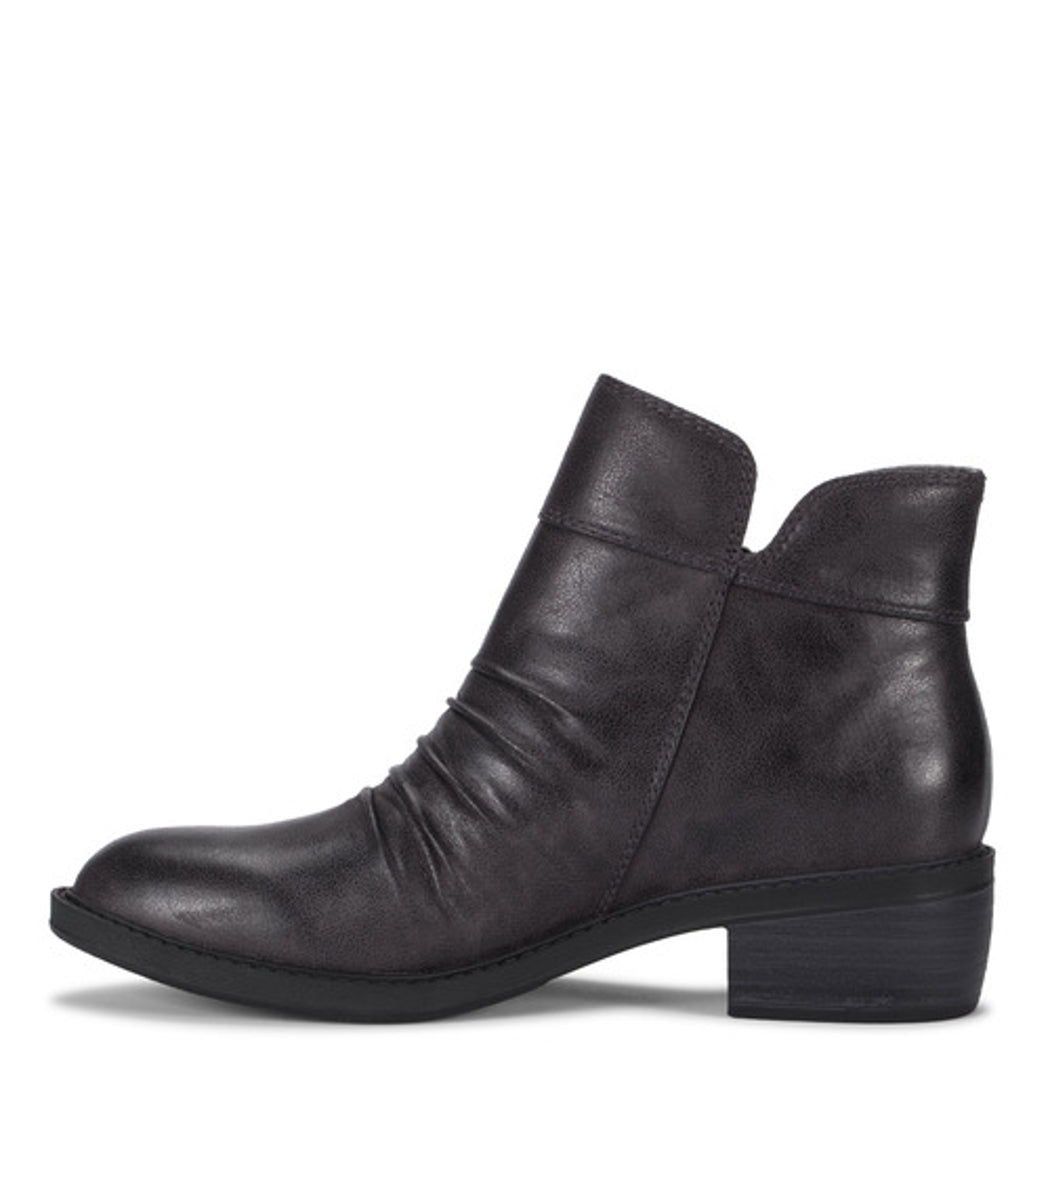 Baretraps Womens Sam Ruched Lug Sole Ankle Booties